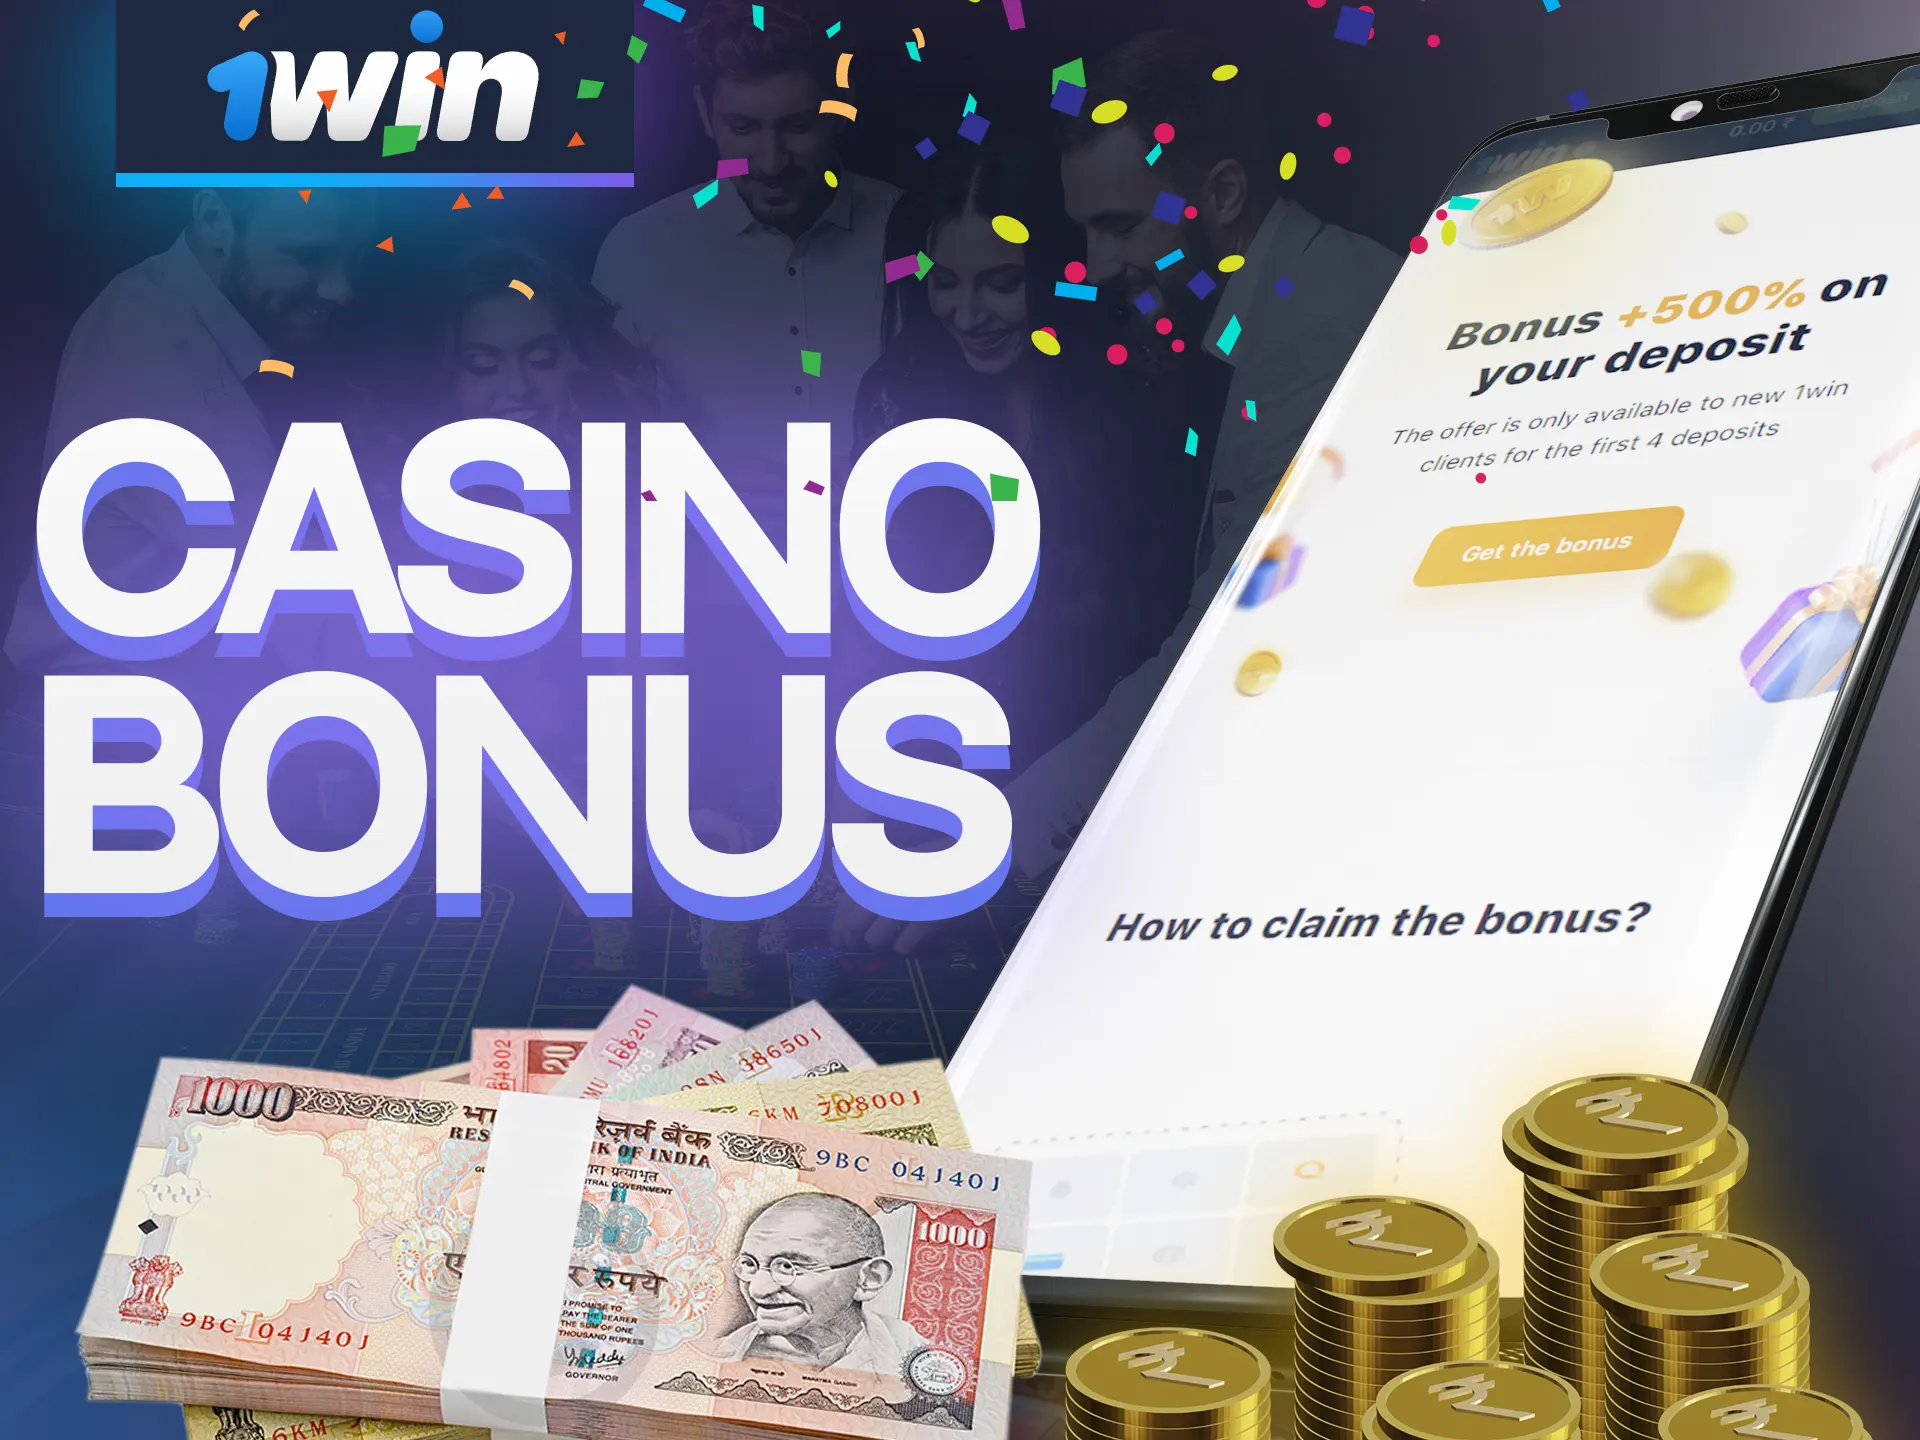 In 1Win app you will find a lucrative bonus for casino games.